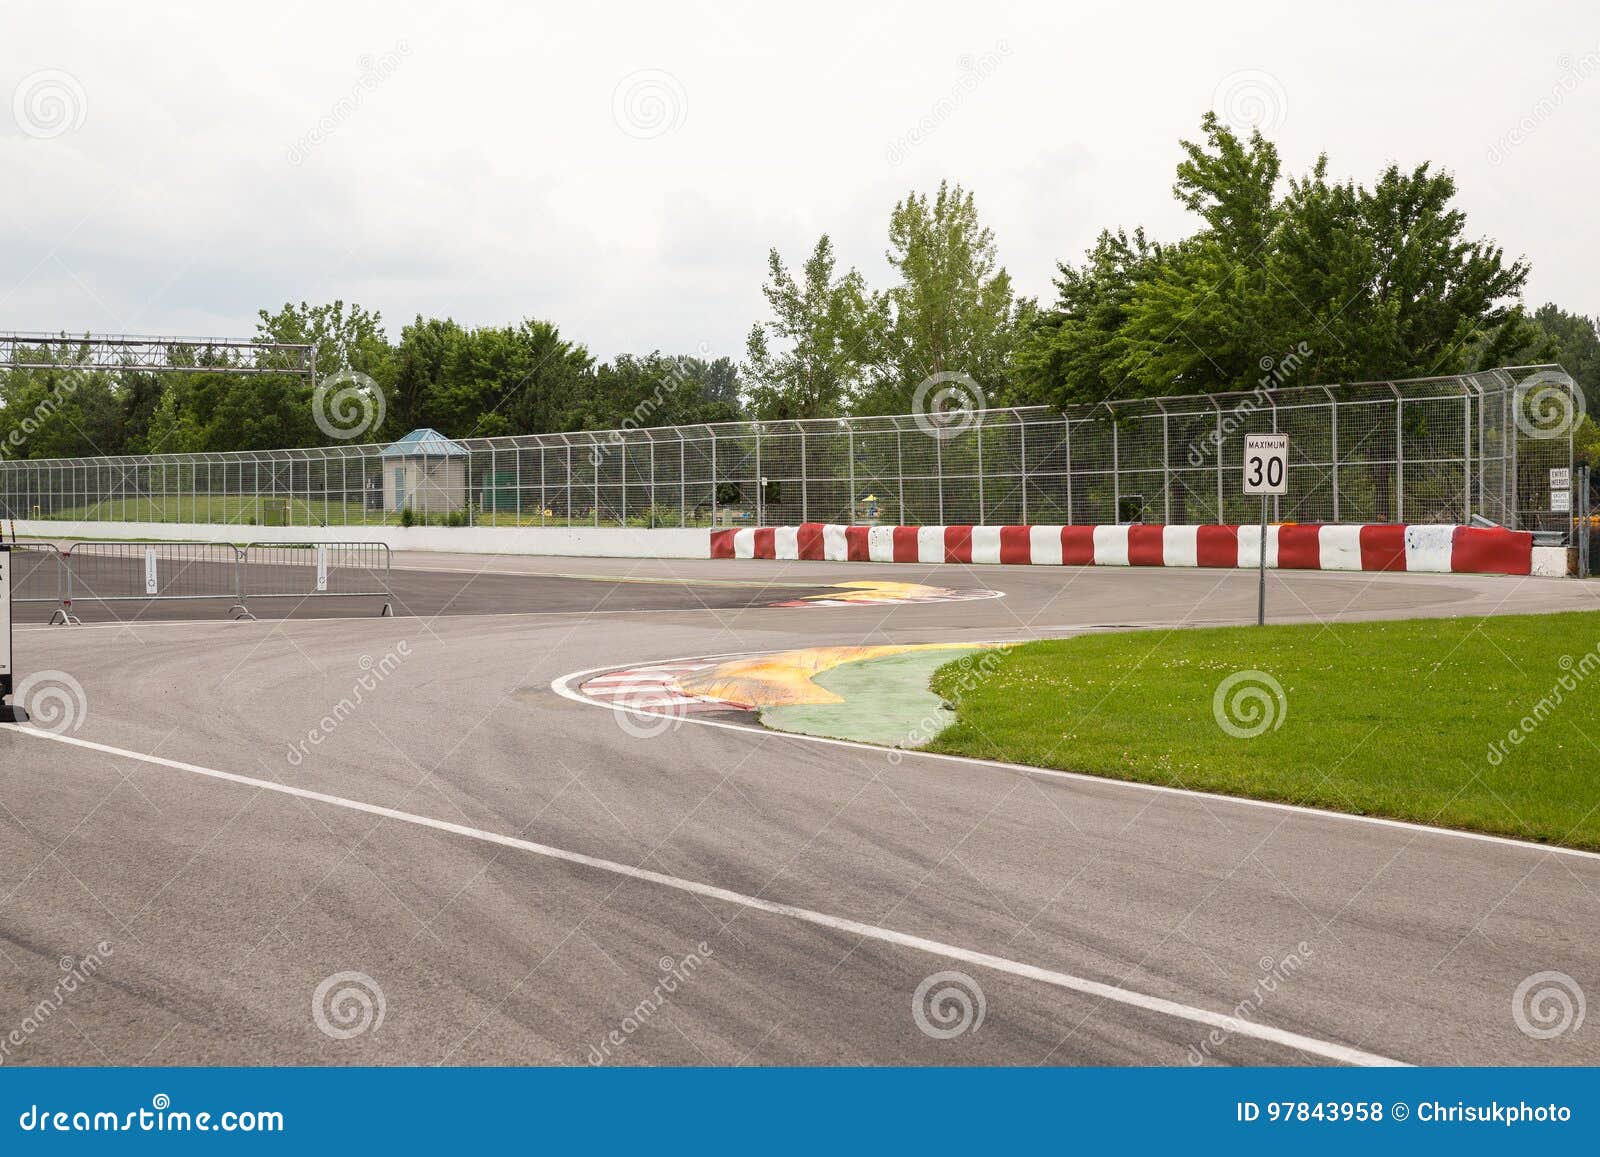 The Approaching Wall of Champions on Gilles Villeneuve Stock Photo - Image of race, jean: